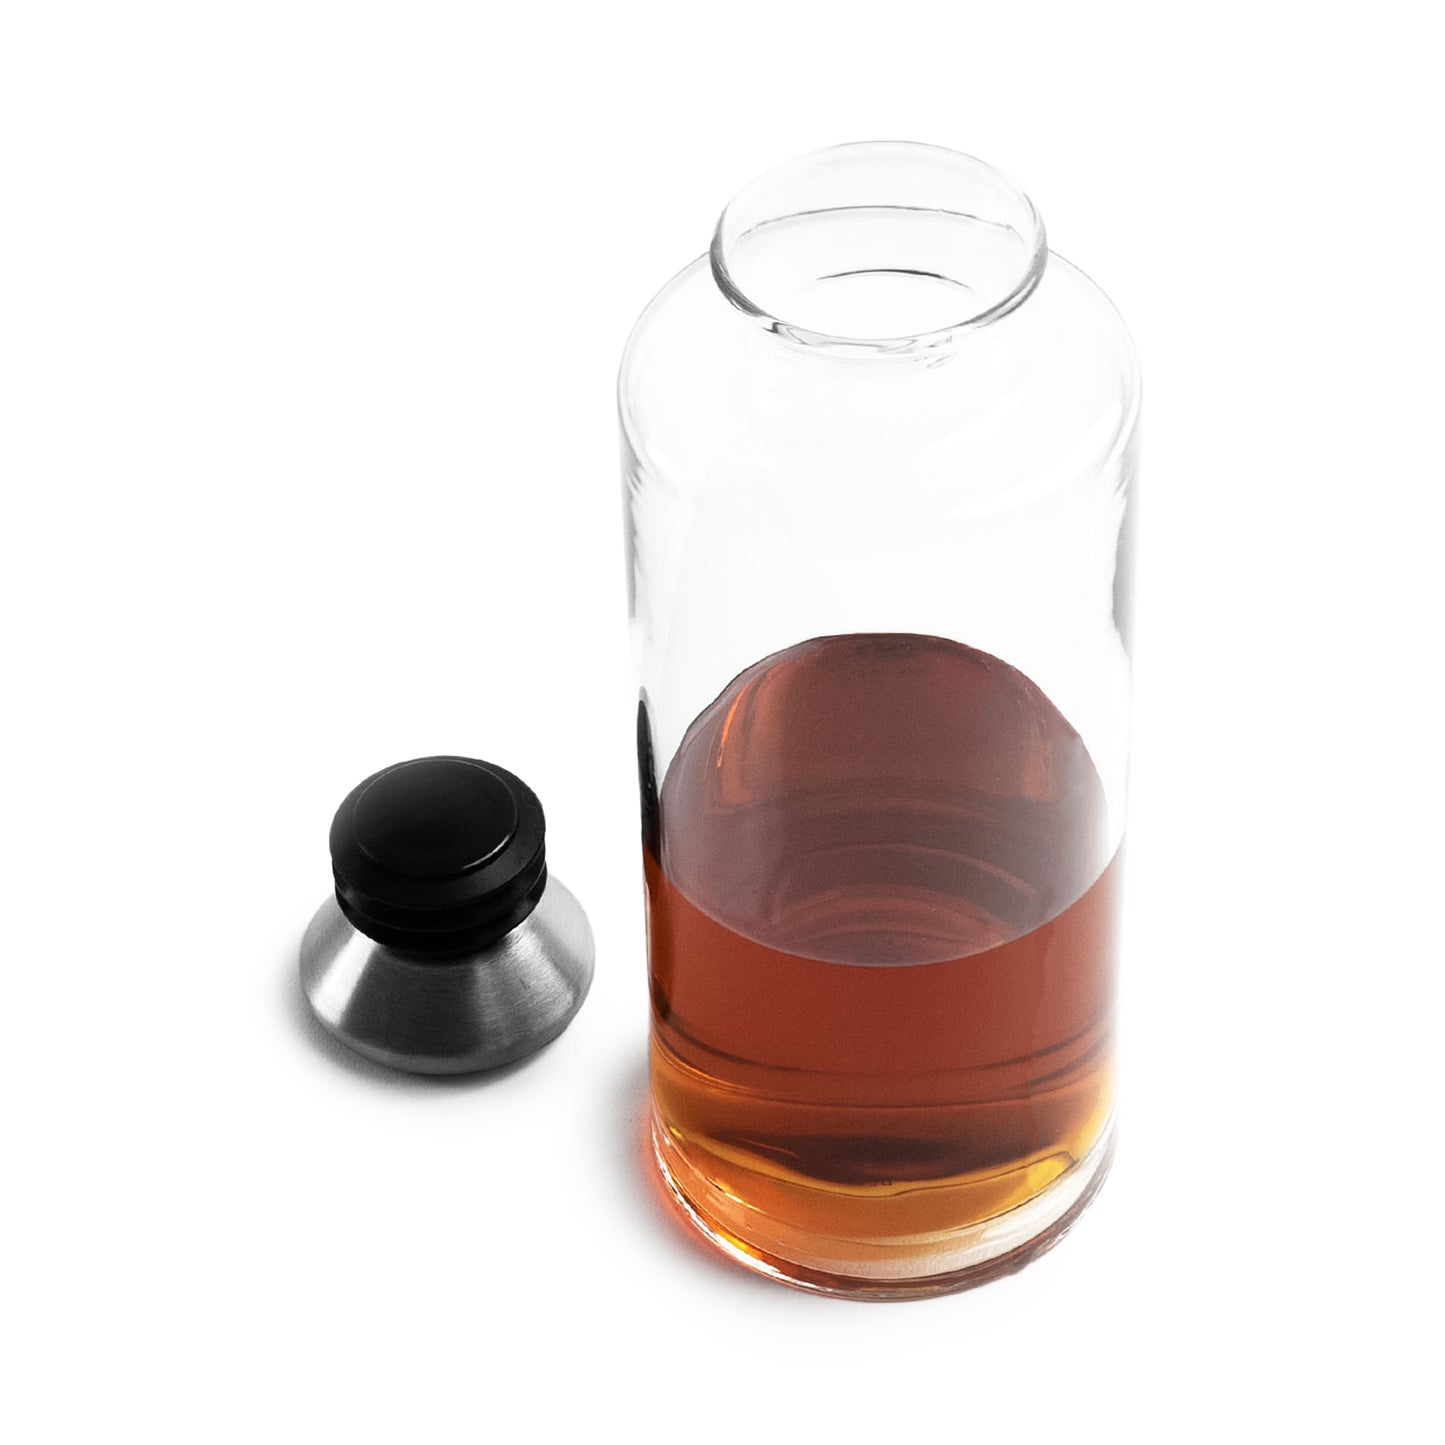 Aged & Ore Travel Decanter